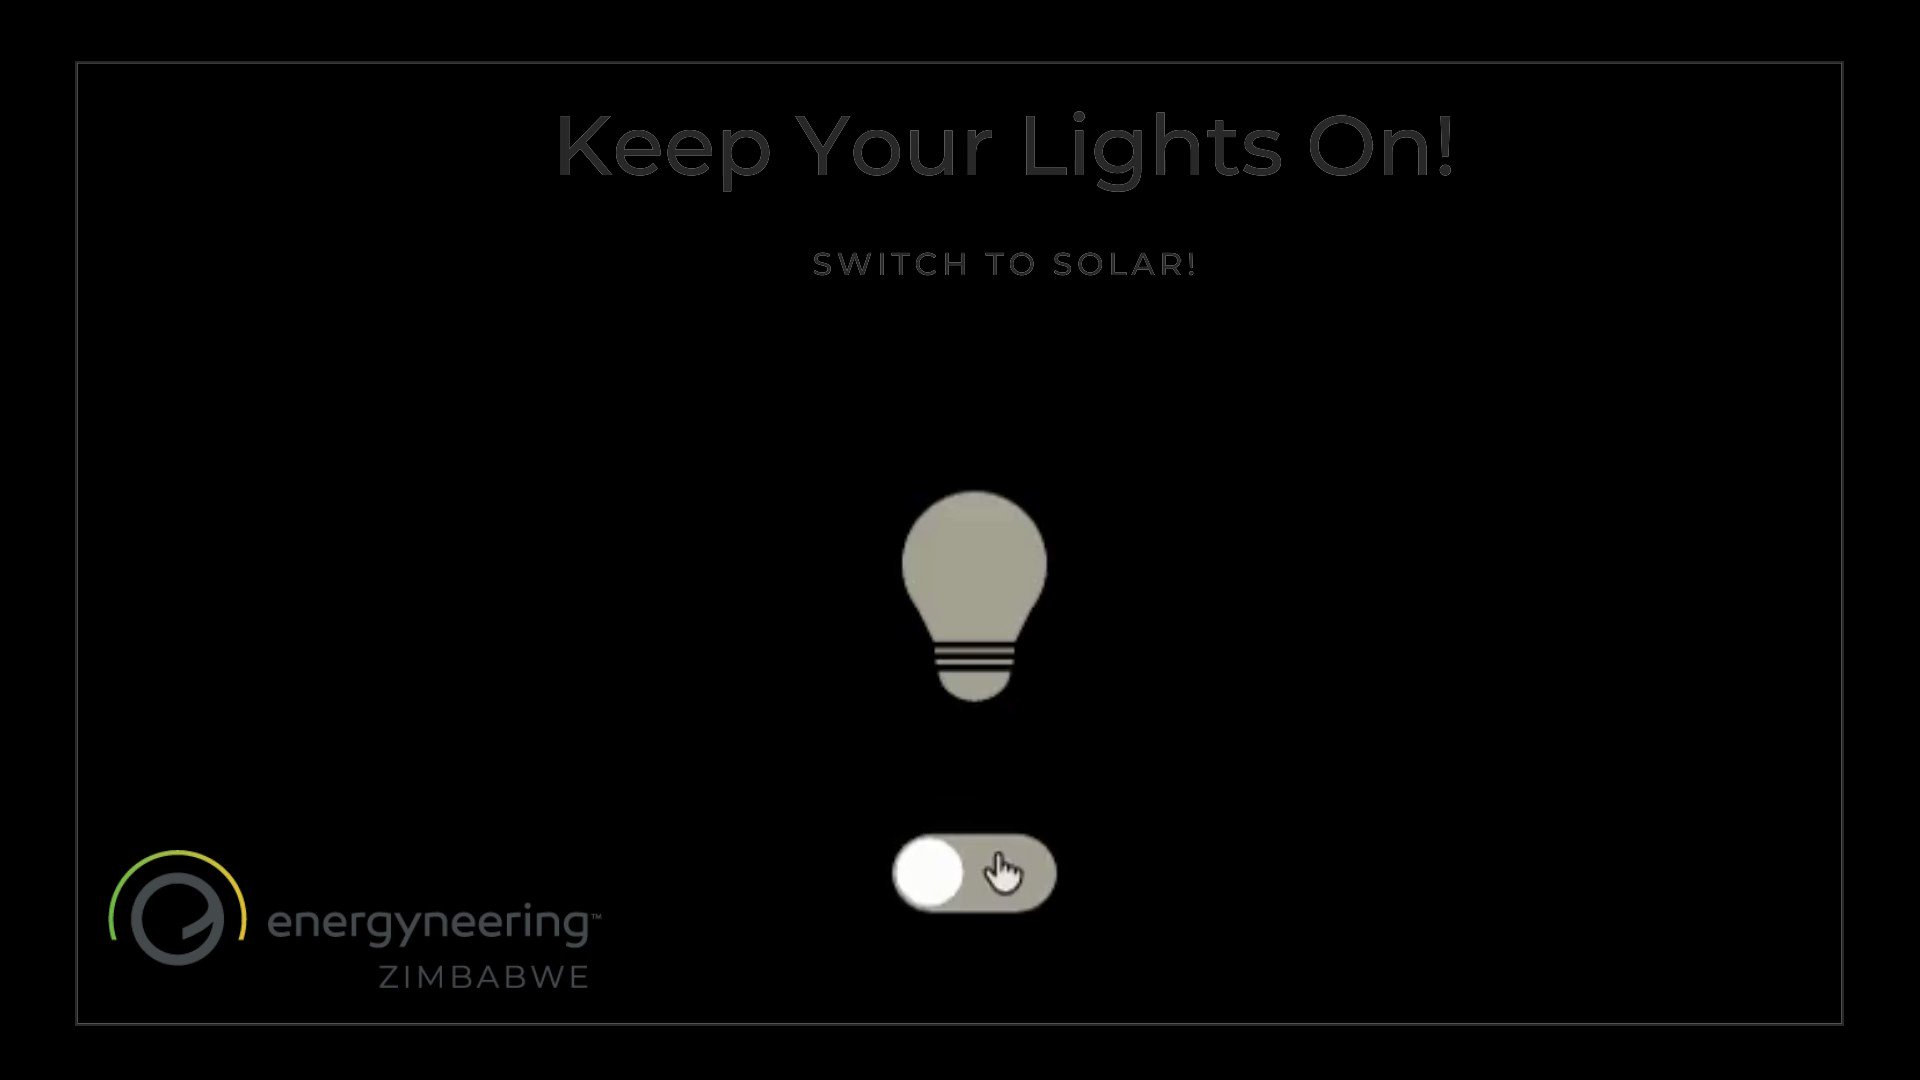 lærebog serie Tilsvarende Energyneering Zimbabwe on Twitter: "Looking for a solution to keep your  lights on and require funding? @EnergyneeringZ provides financial options  that will ease the process of switching to solar Don't wait, contact